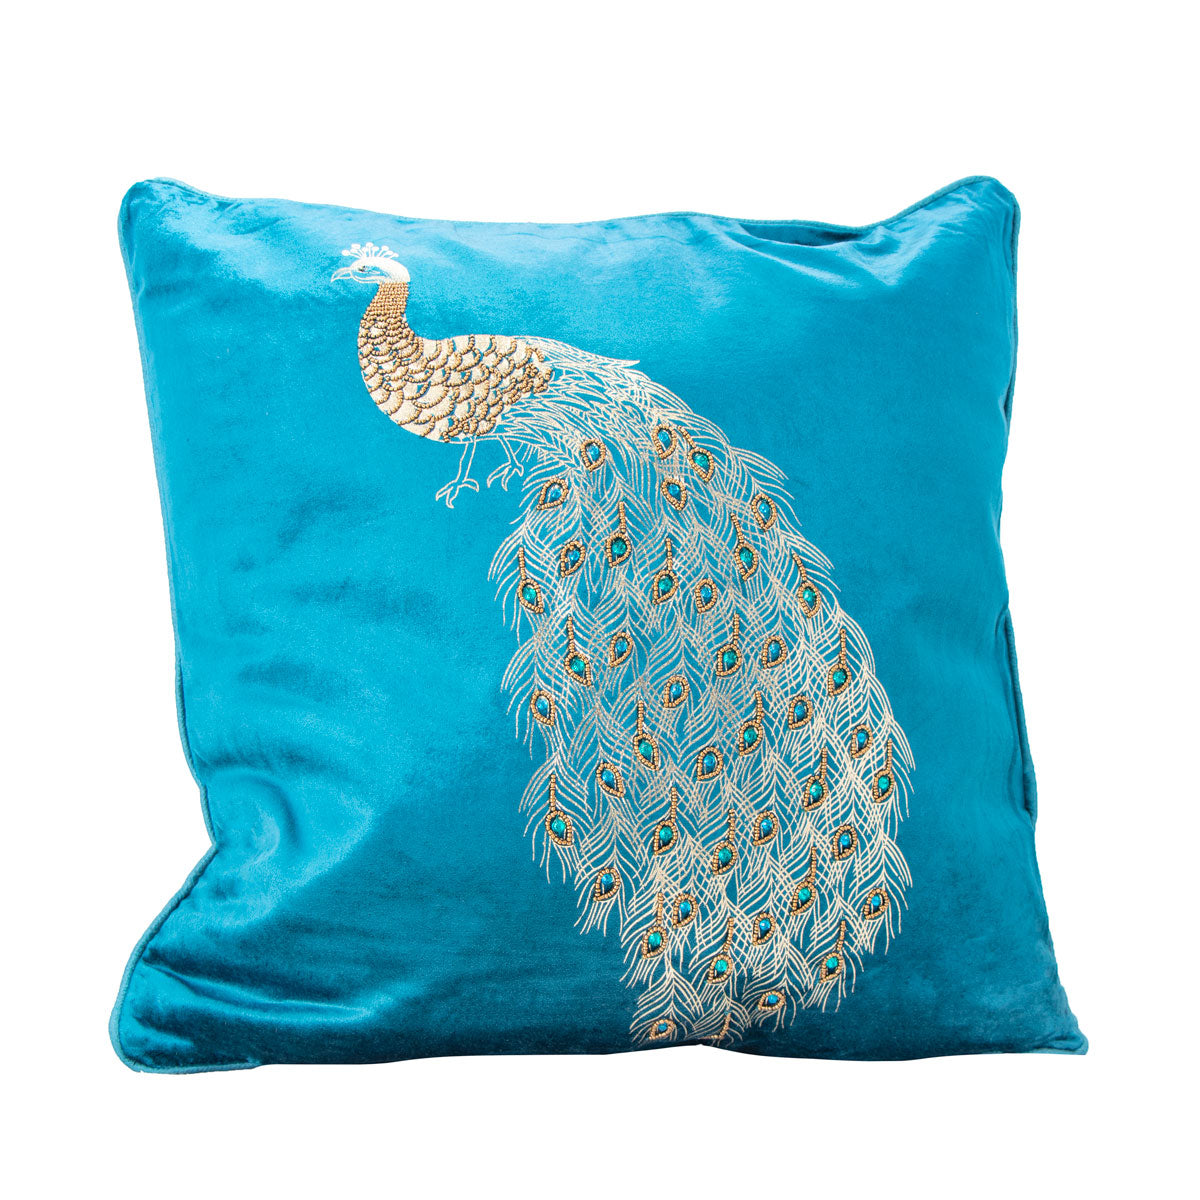 Pier 1 Teal Beaded Pea Pillow The